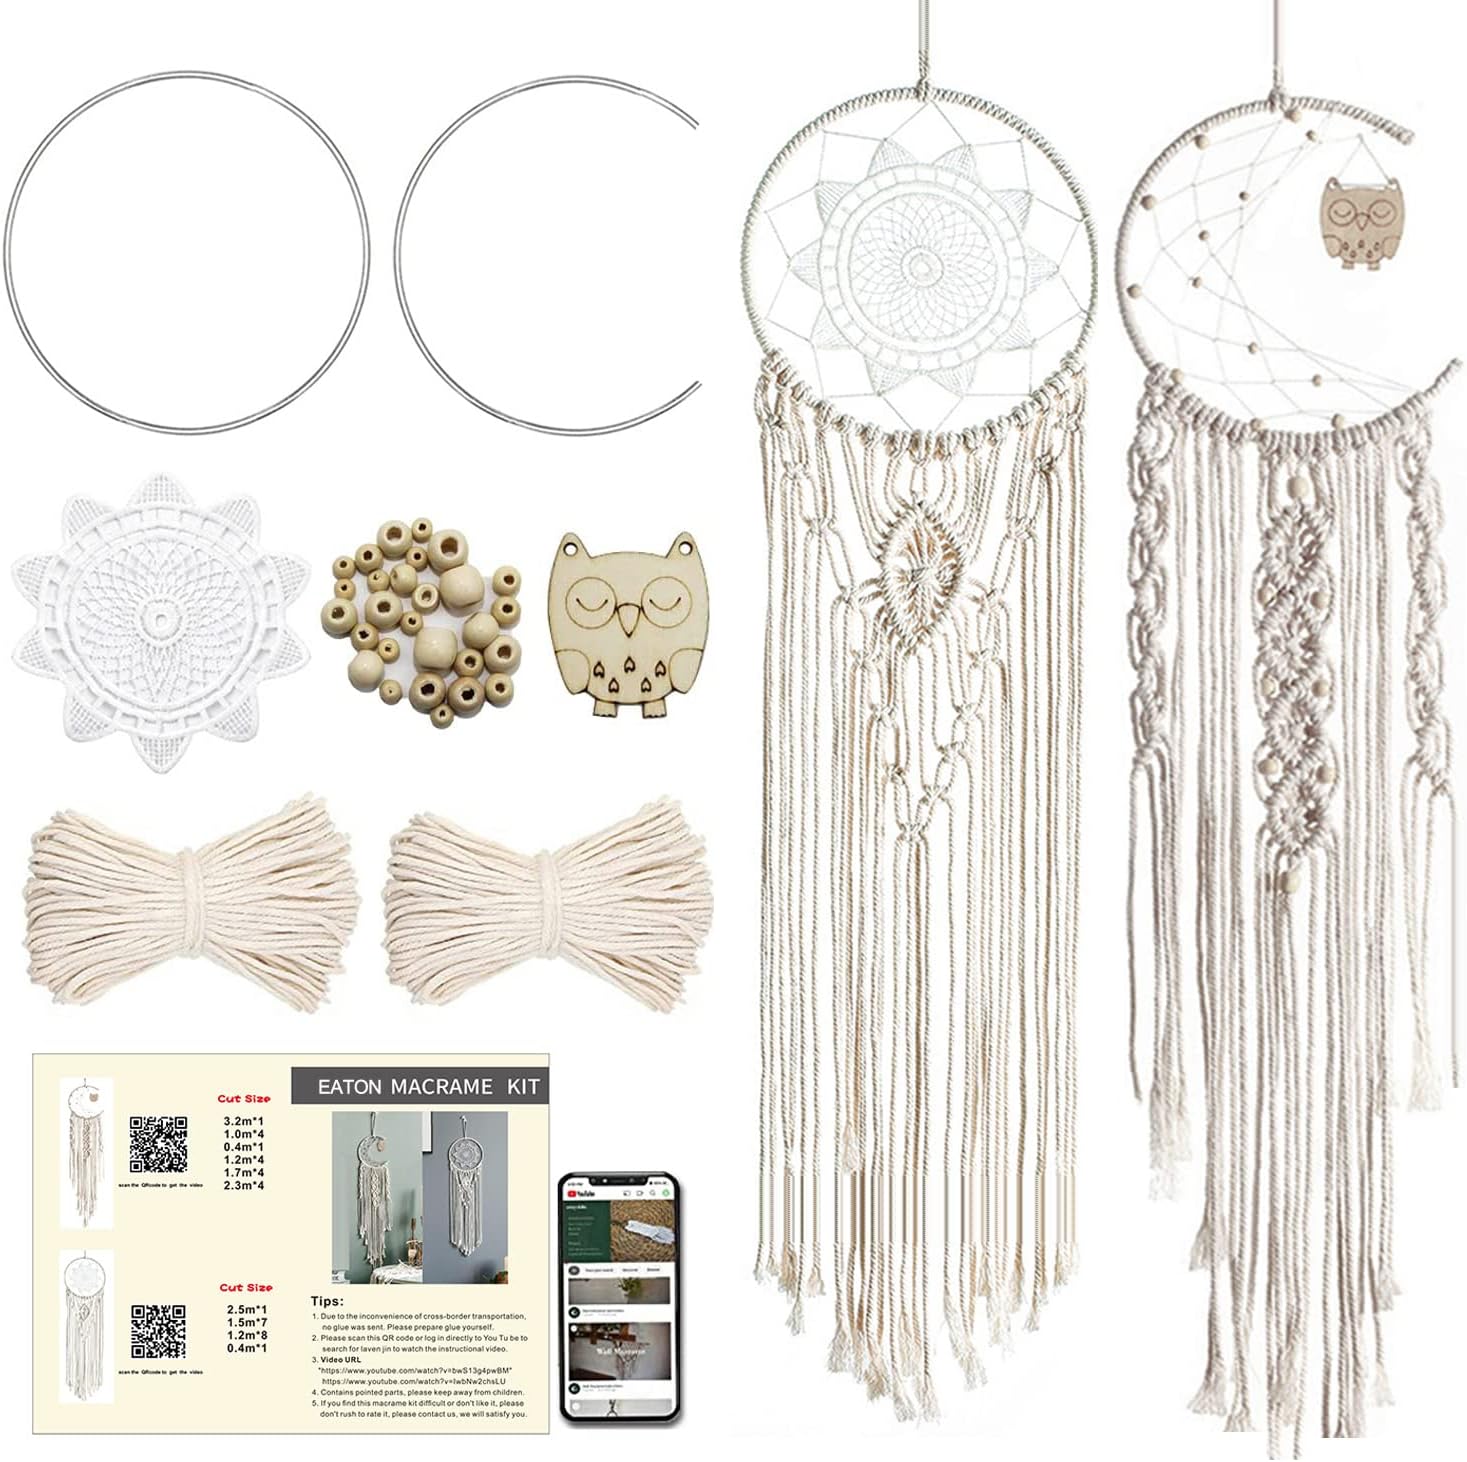  Diy Dream Catcher Kit, Dream Catcher Supplies Gywantt 5 Pcs  Gold Metal Hoops in 5 Size 50pcs 5 Styled Feathers 10 Pcs 3 mm Faux Suede  Cord with 5m Each Color